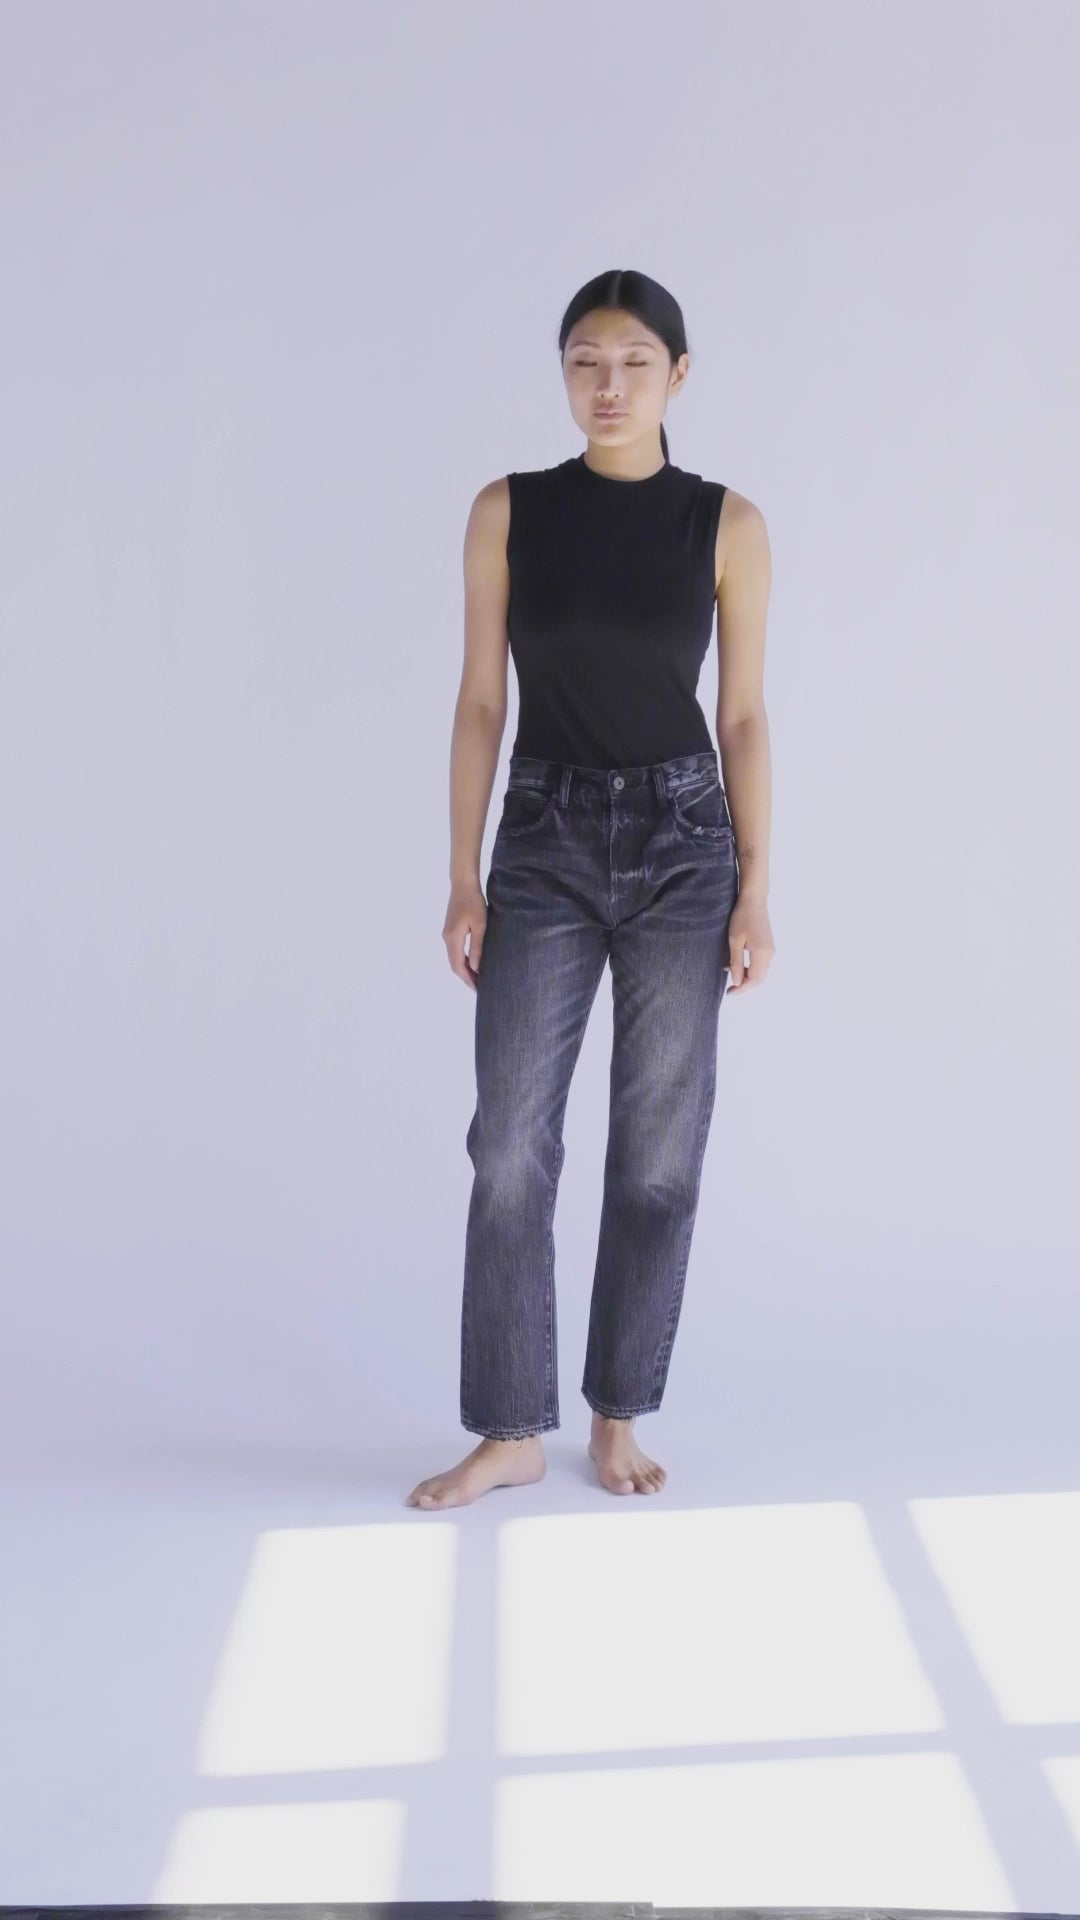 10-second video featuring the fit model in the B O R O デニム (BORO DENIM) 'Paint it Black' Tokyo jeans. The model gracefully makes a full 360-degree turn to showcase the jeans' mid-rise, straight-leg silhouette, emphasizing both the front and back views